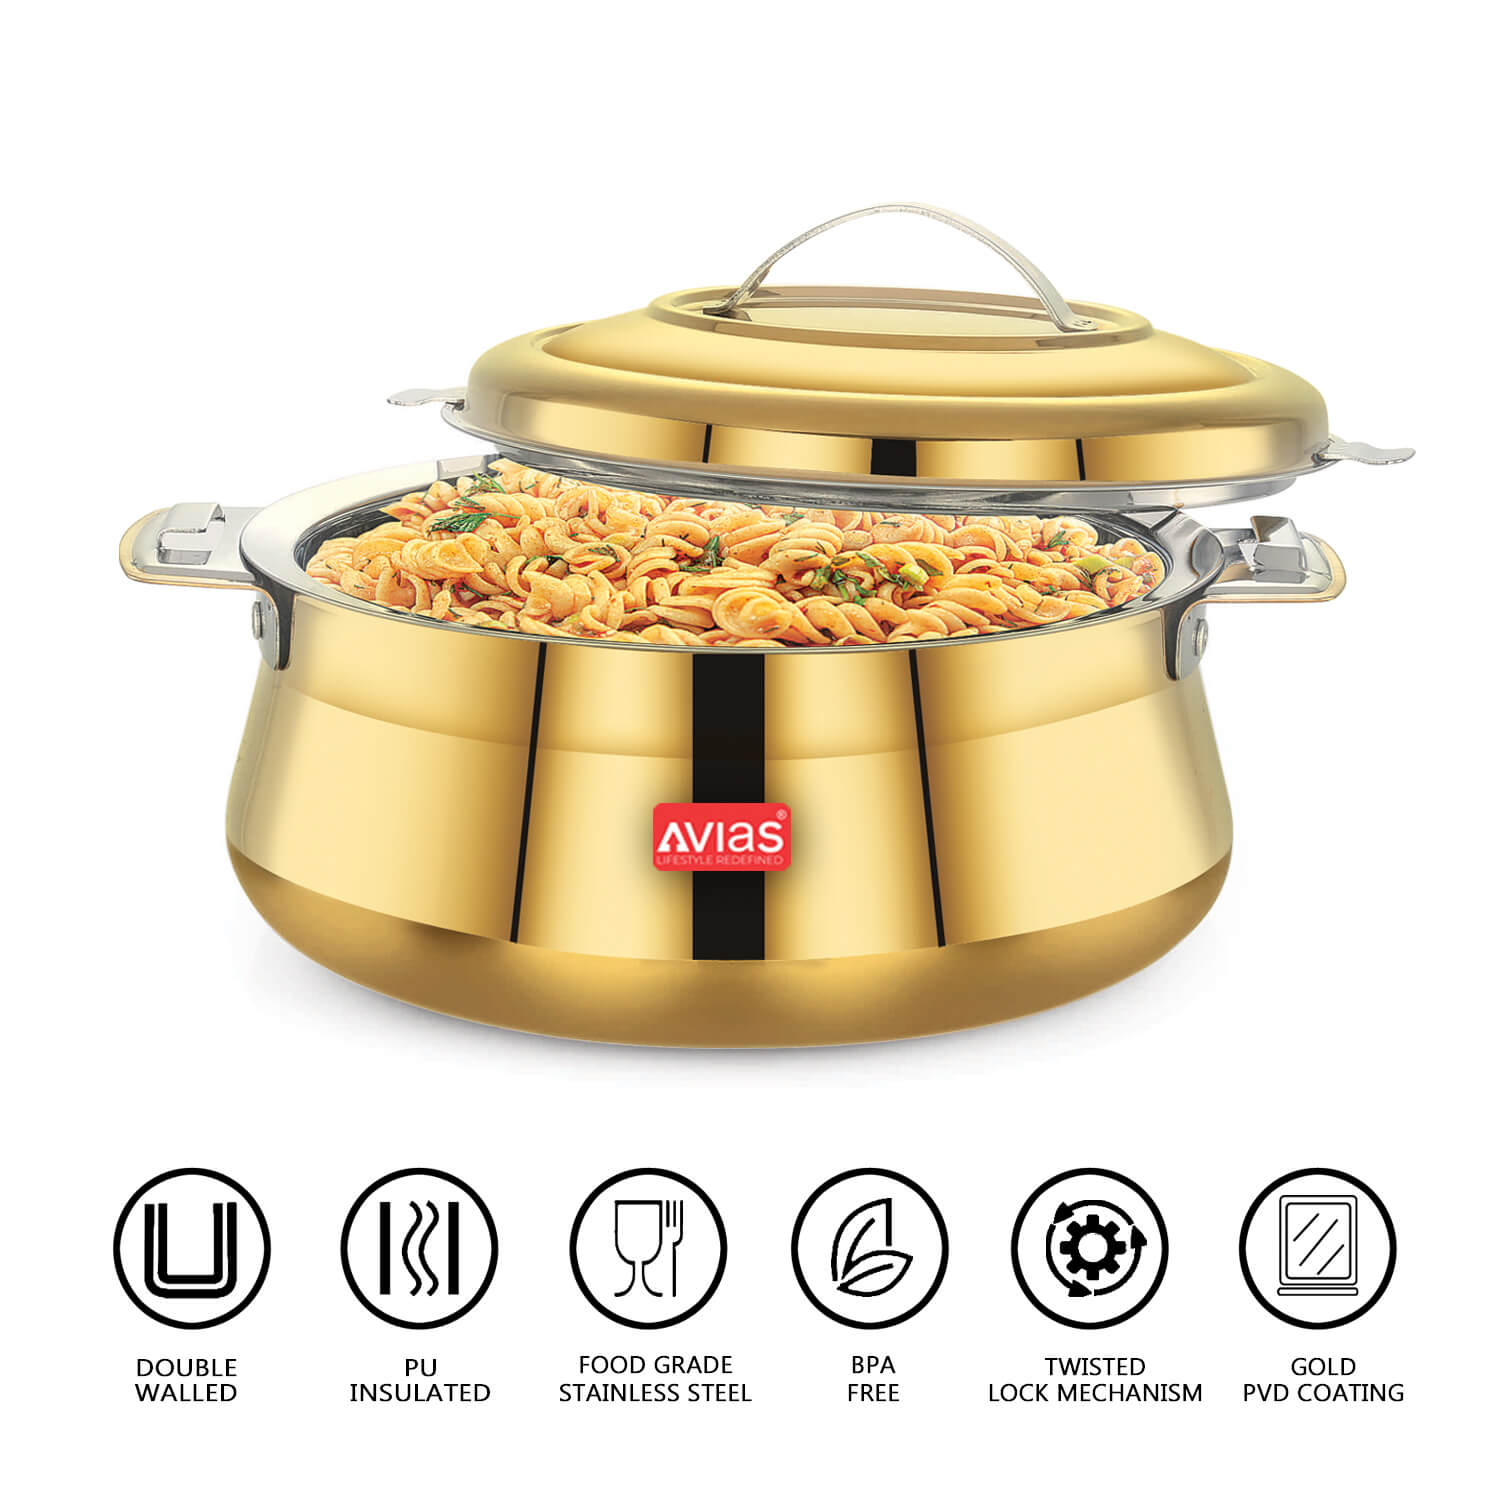 AVIAS Riara Gold Premium Stainless steel casserole/ hotpot/ hot case with twist lock with sturdly side handles | Roti/ chapati, curry , gravy, rice serveware | 1.5L/ 2.5L